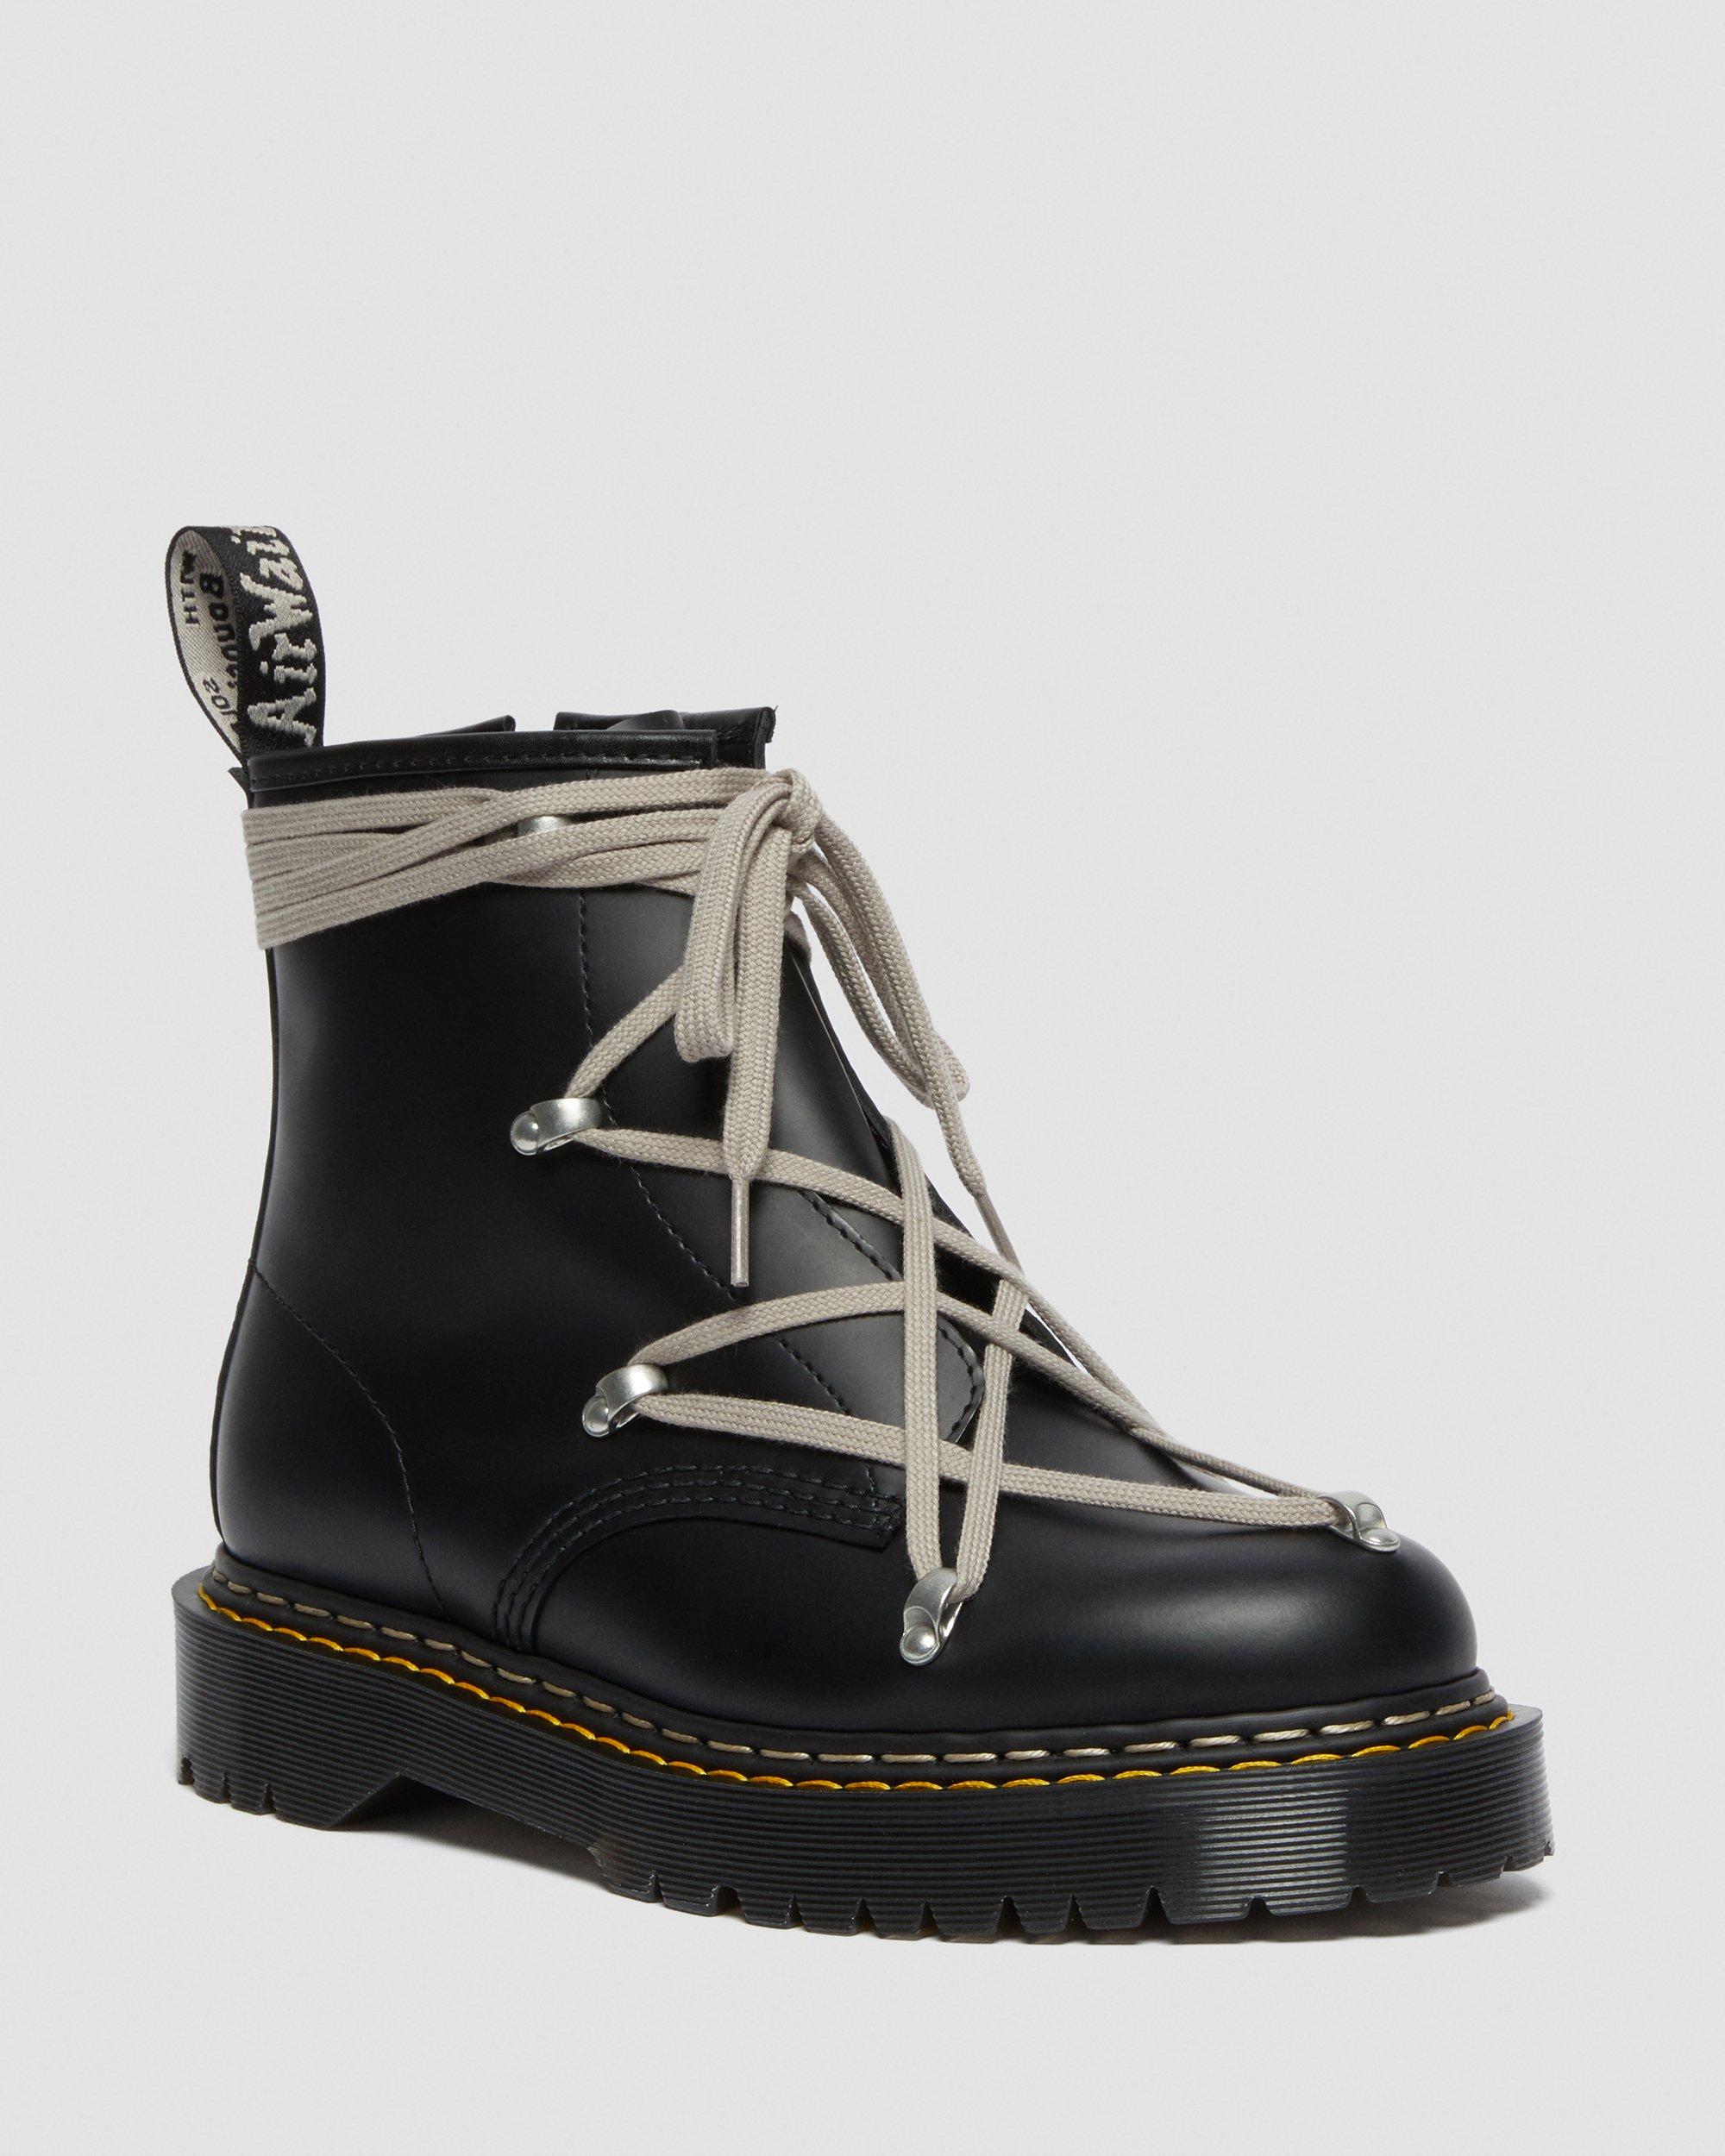 Rick Owens 1460 Bex Leather Lace Up Boots in Black | Dr. Martens